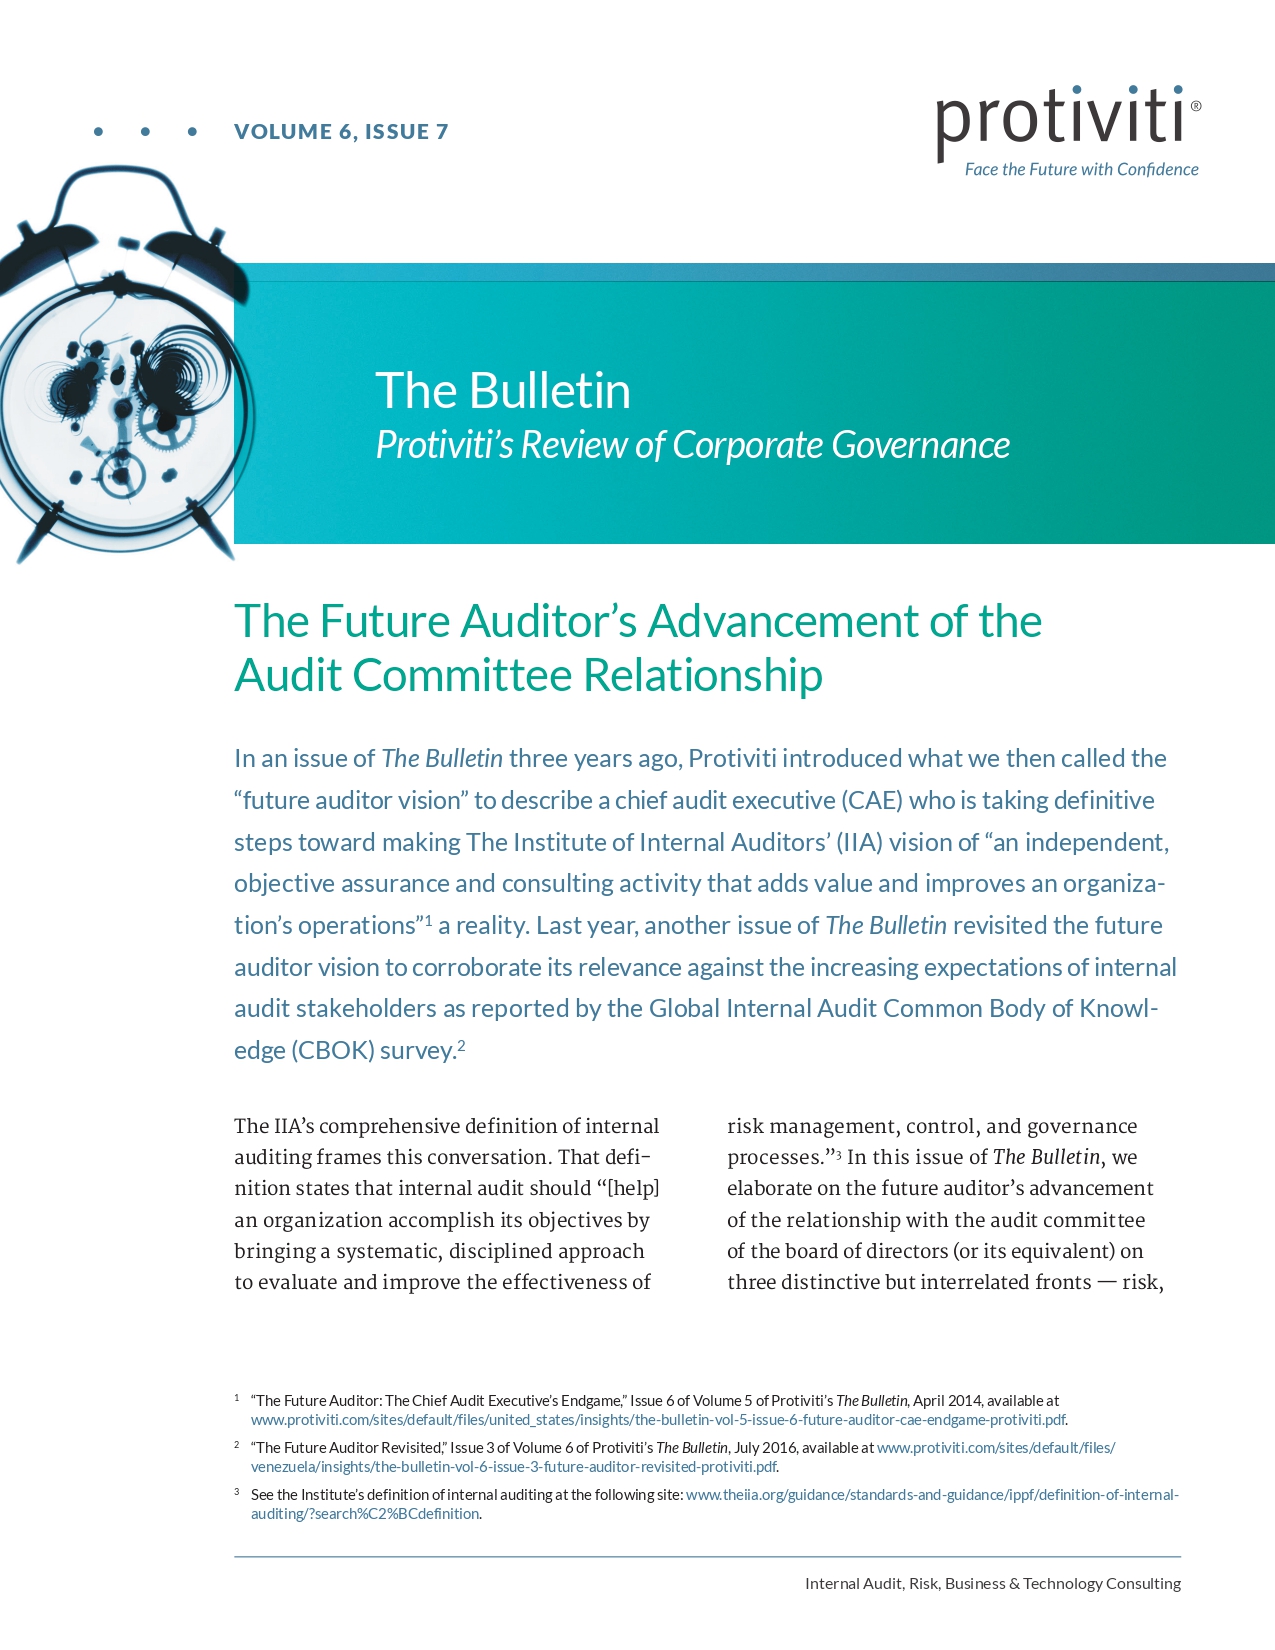 Screenshot of the first page of The Future Auditor’s Advancement of the Audit Committee Relationship